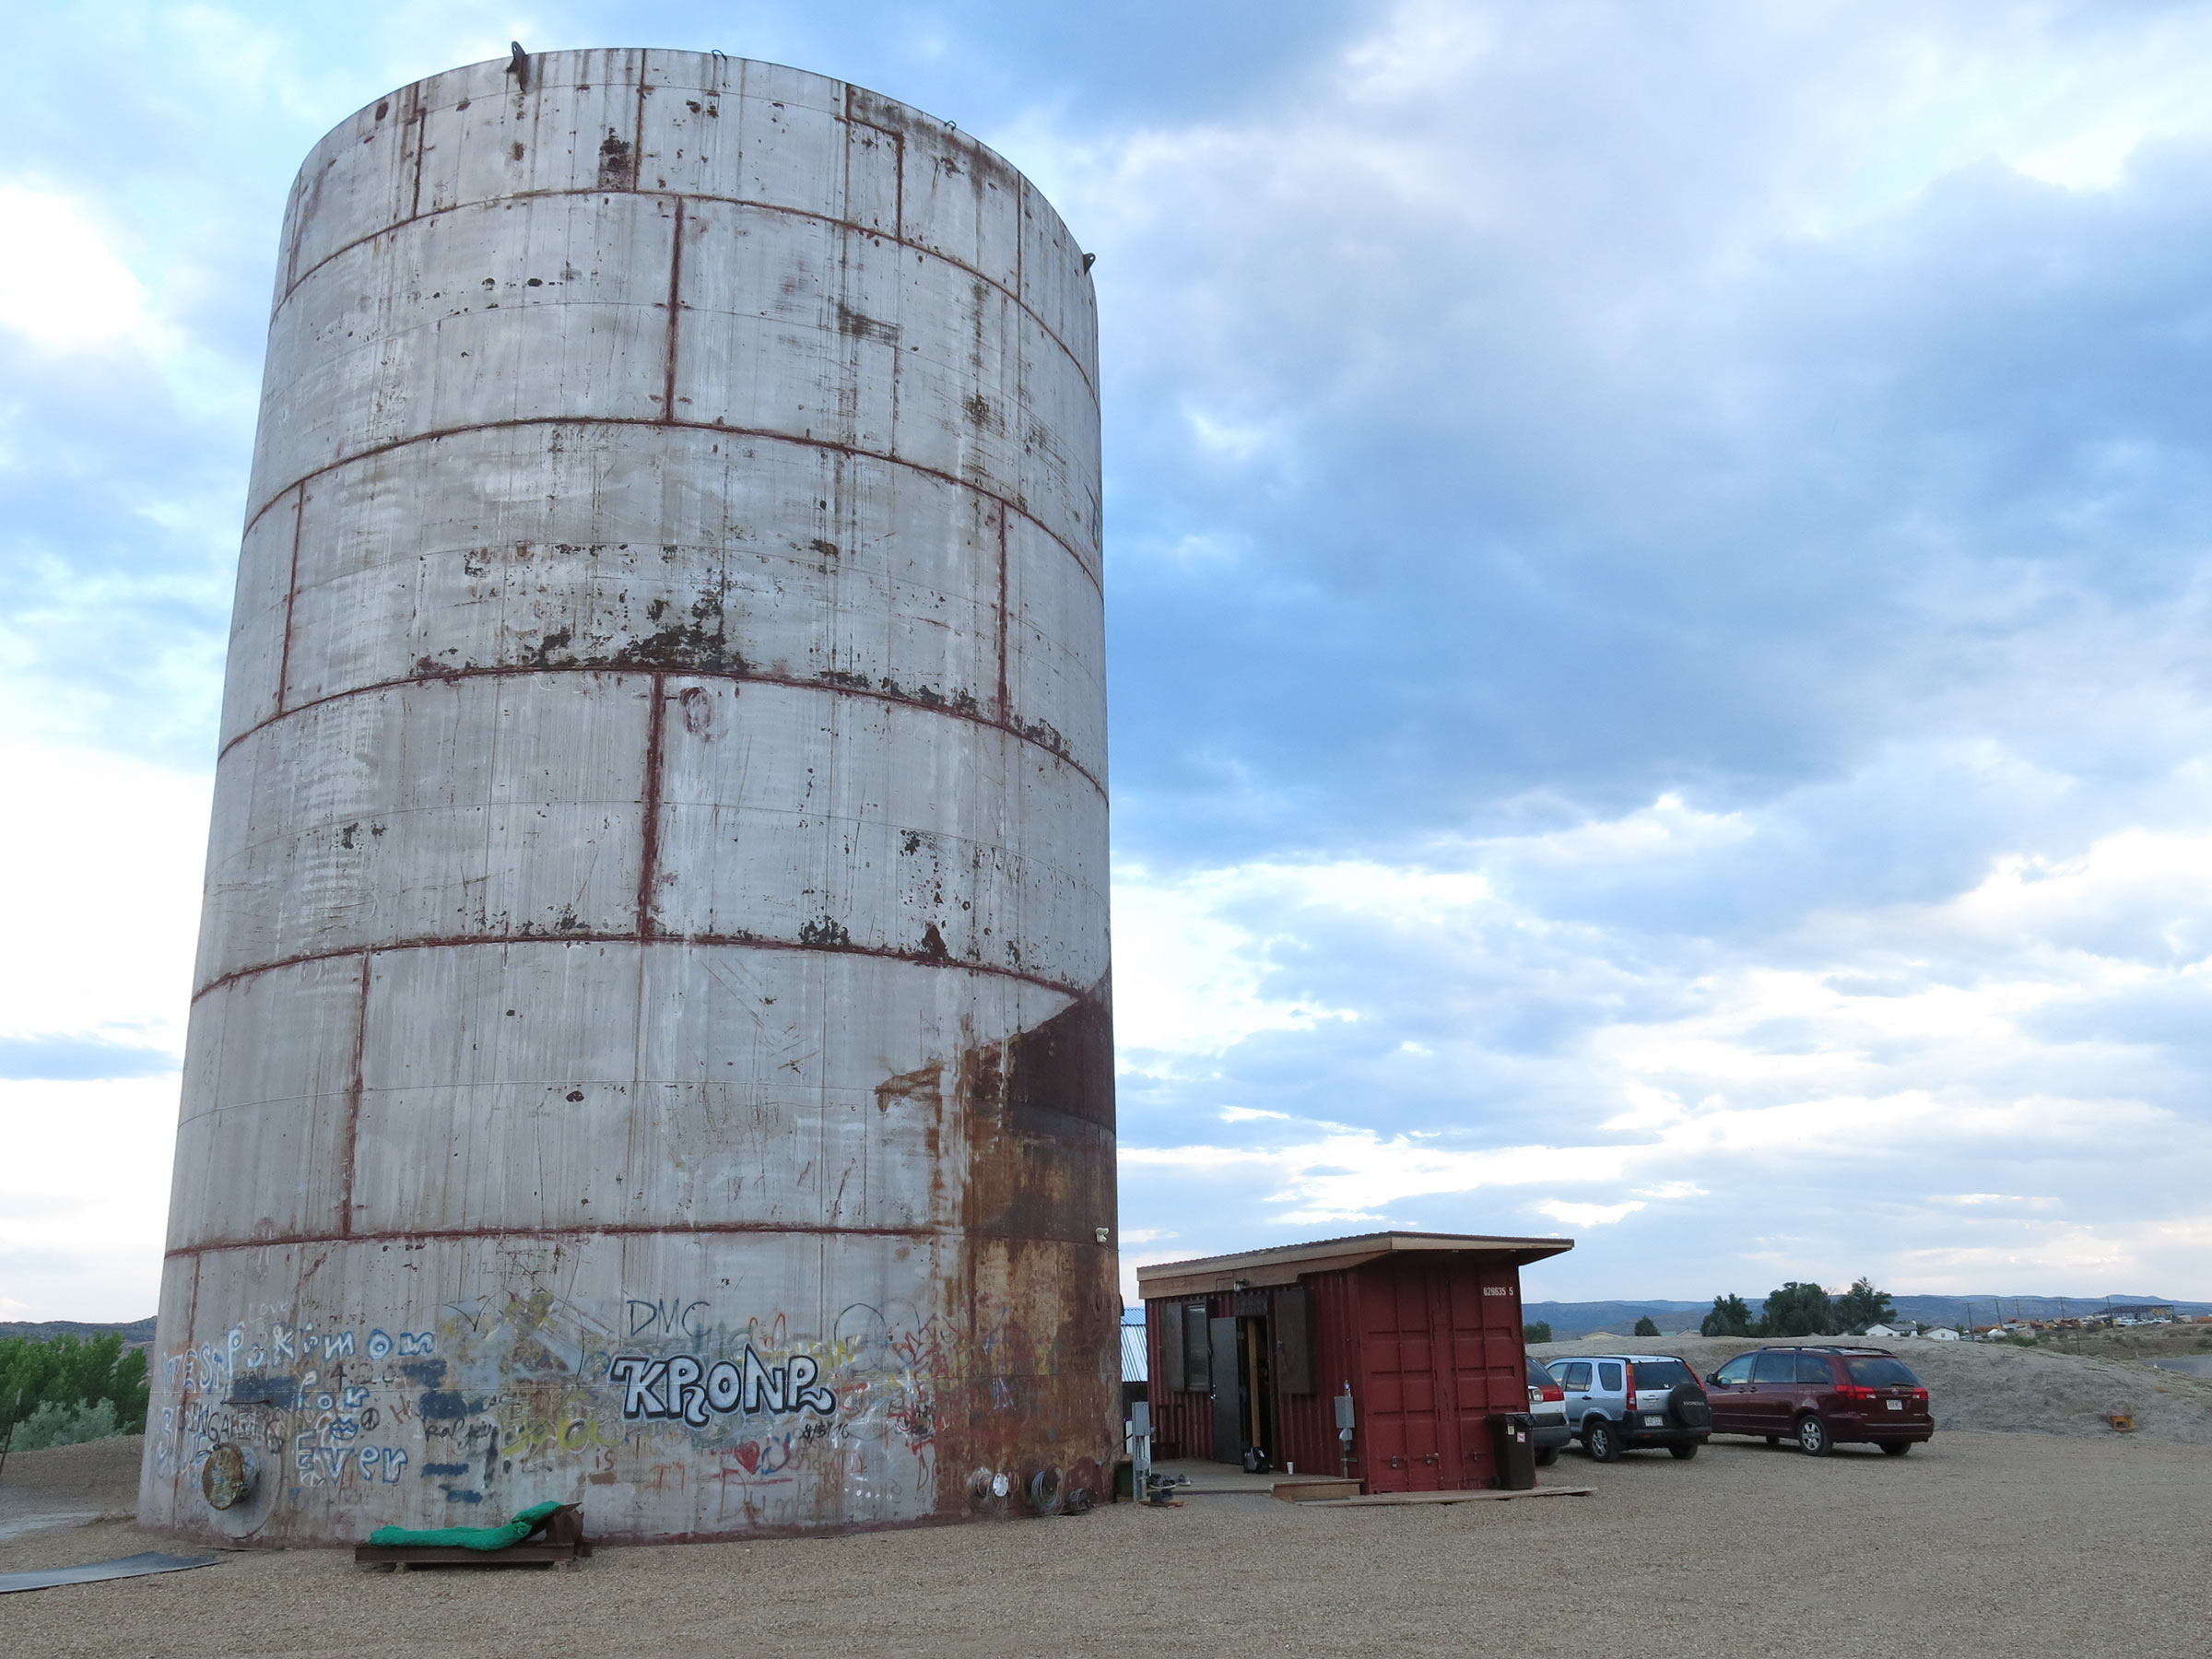 The Tank, a 65-foot-tall empty metal water treatment tank in Langley, Colorado